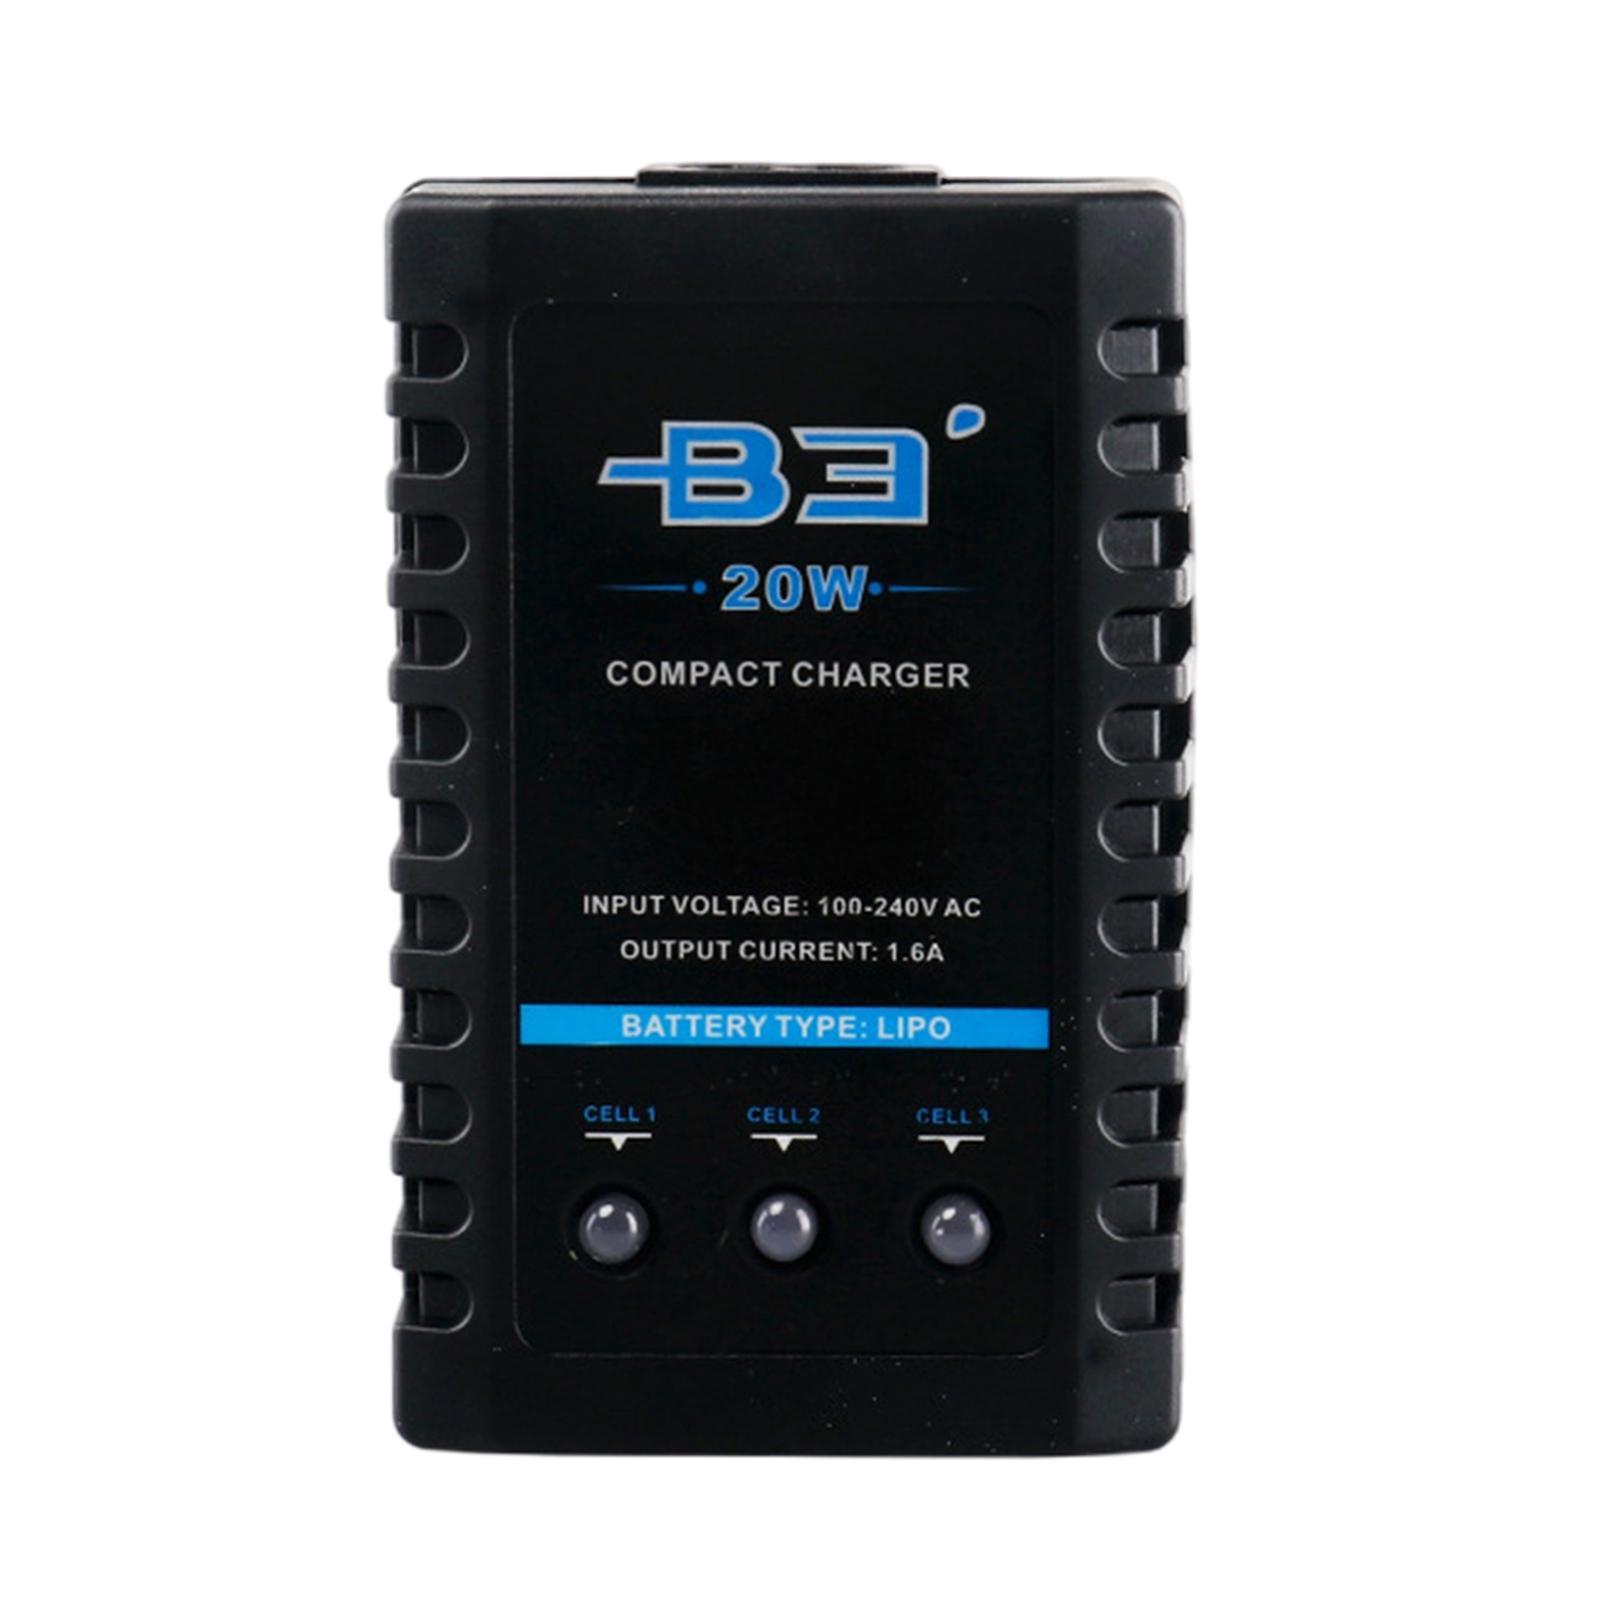 B3 RC 20W Balance Charger 1.6A for 2S 3S 7.4V 11.1V Lithium -EU